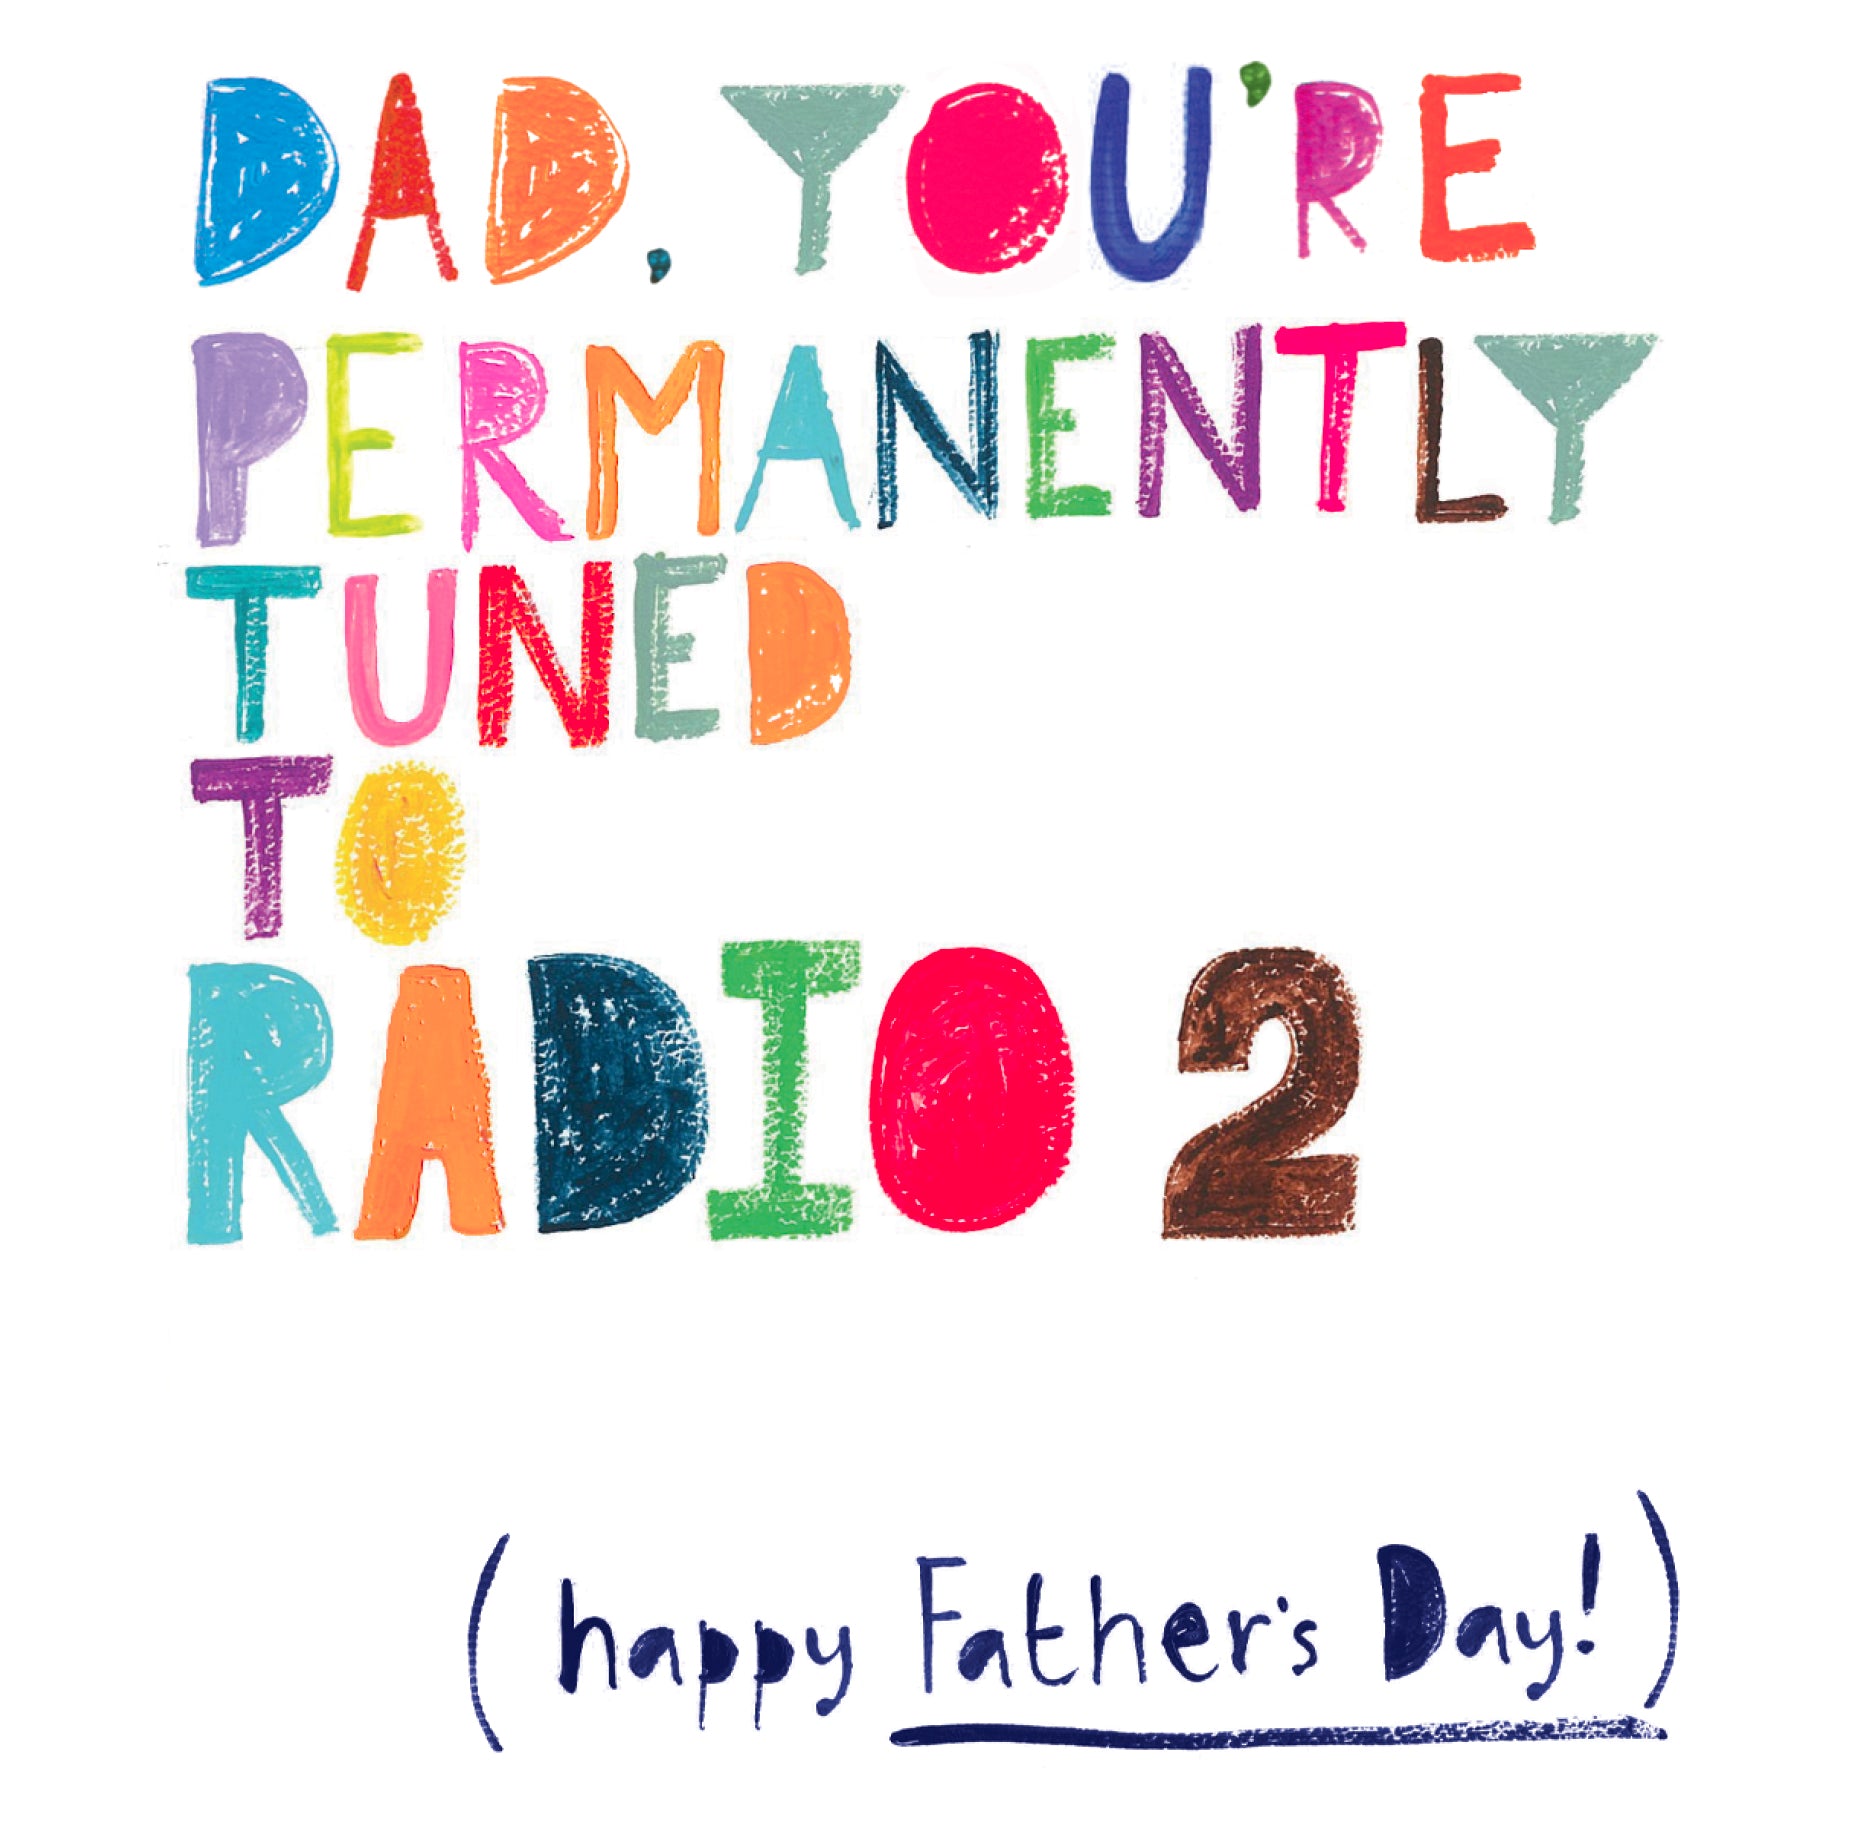 Radio 2 Funny Father's Day Card by penny black